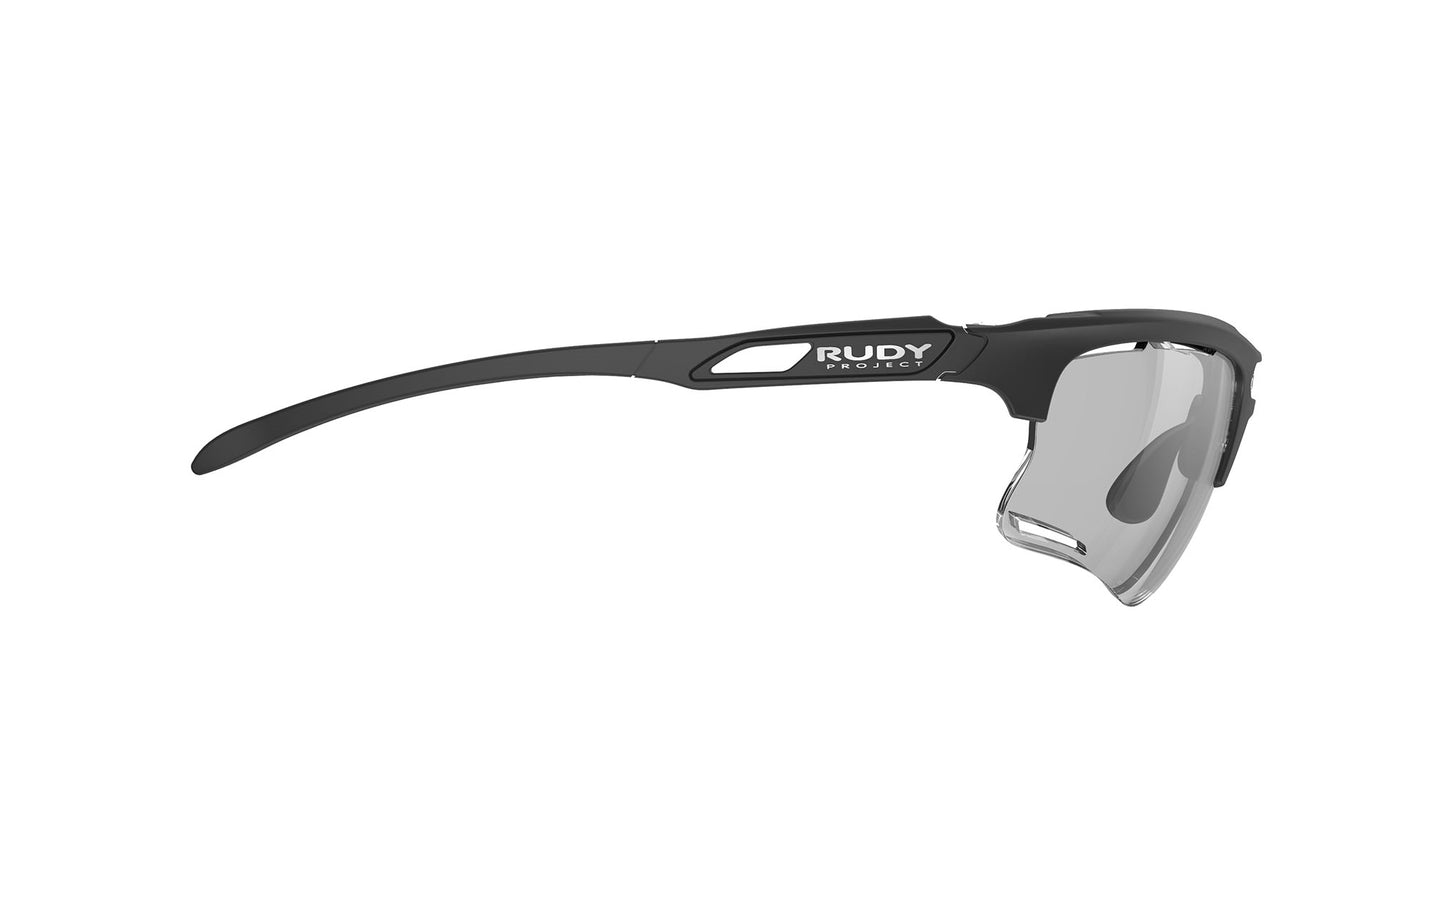 Load image into Gallery viewer, Rudy Project Keyblade Black Matte - Impactx Photochromic 2 Black Sunglasses
